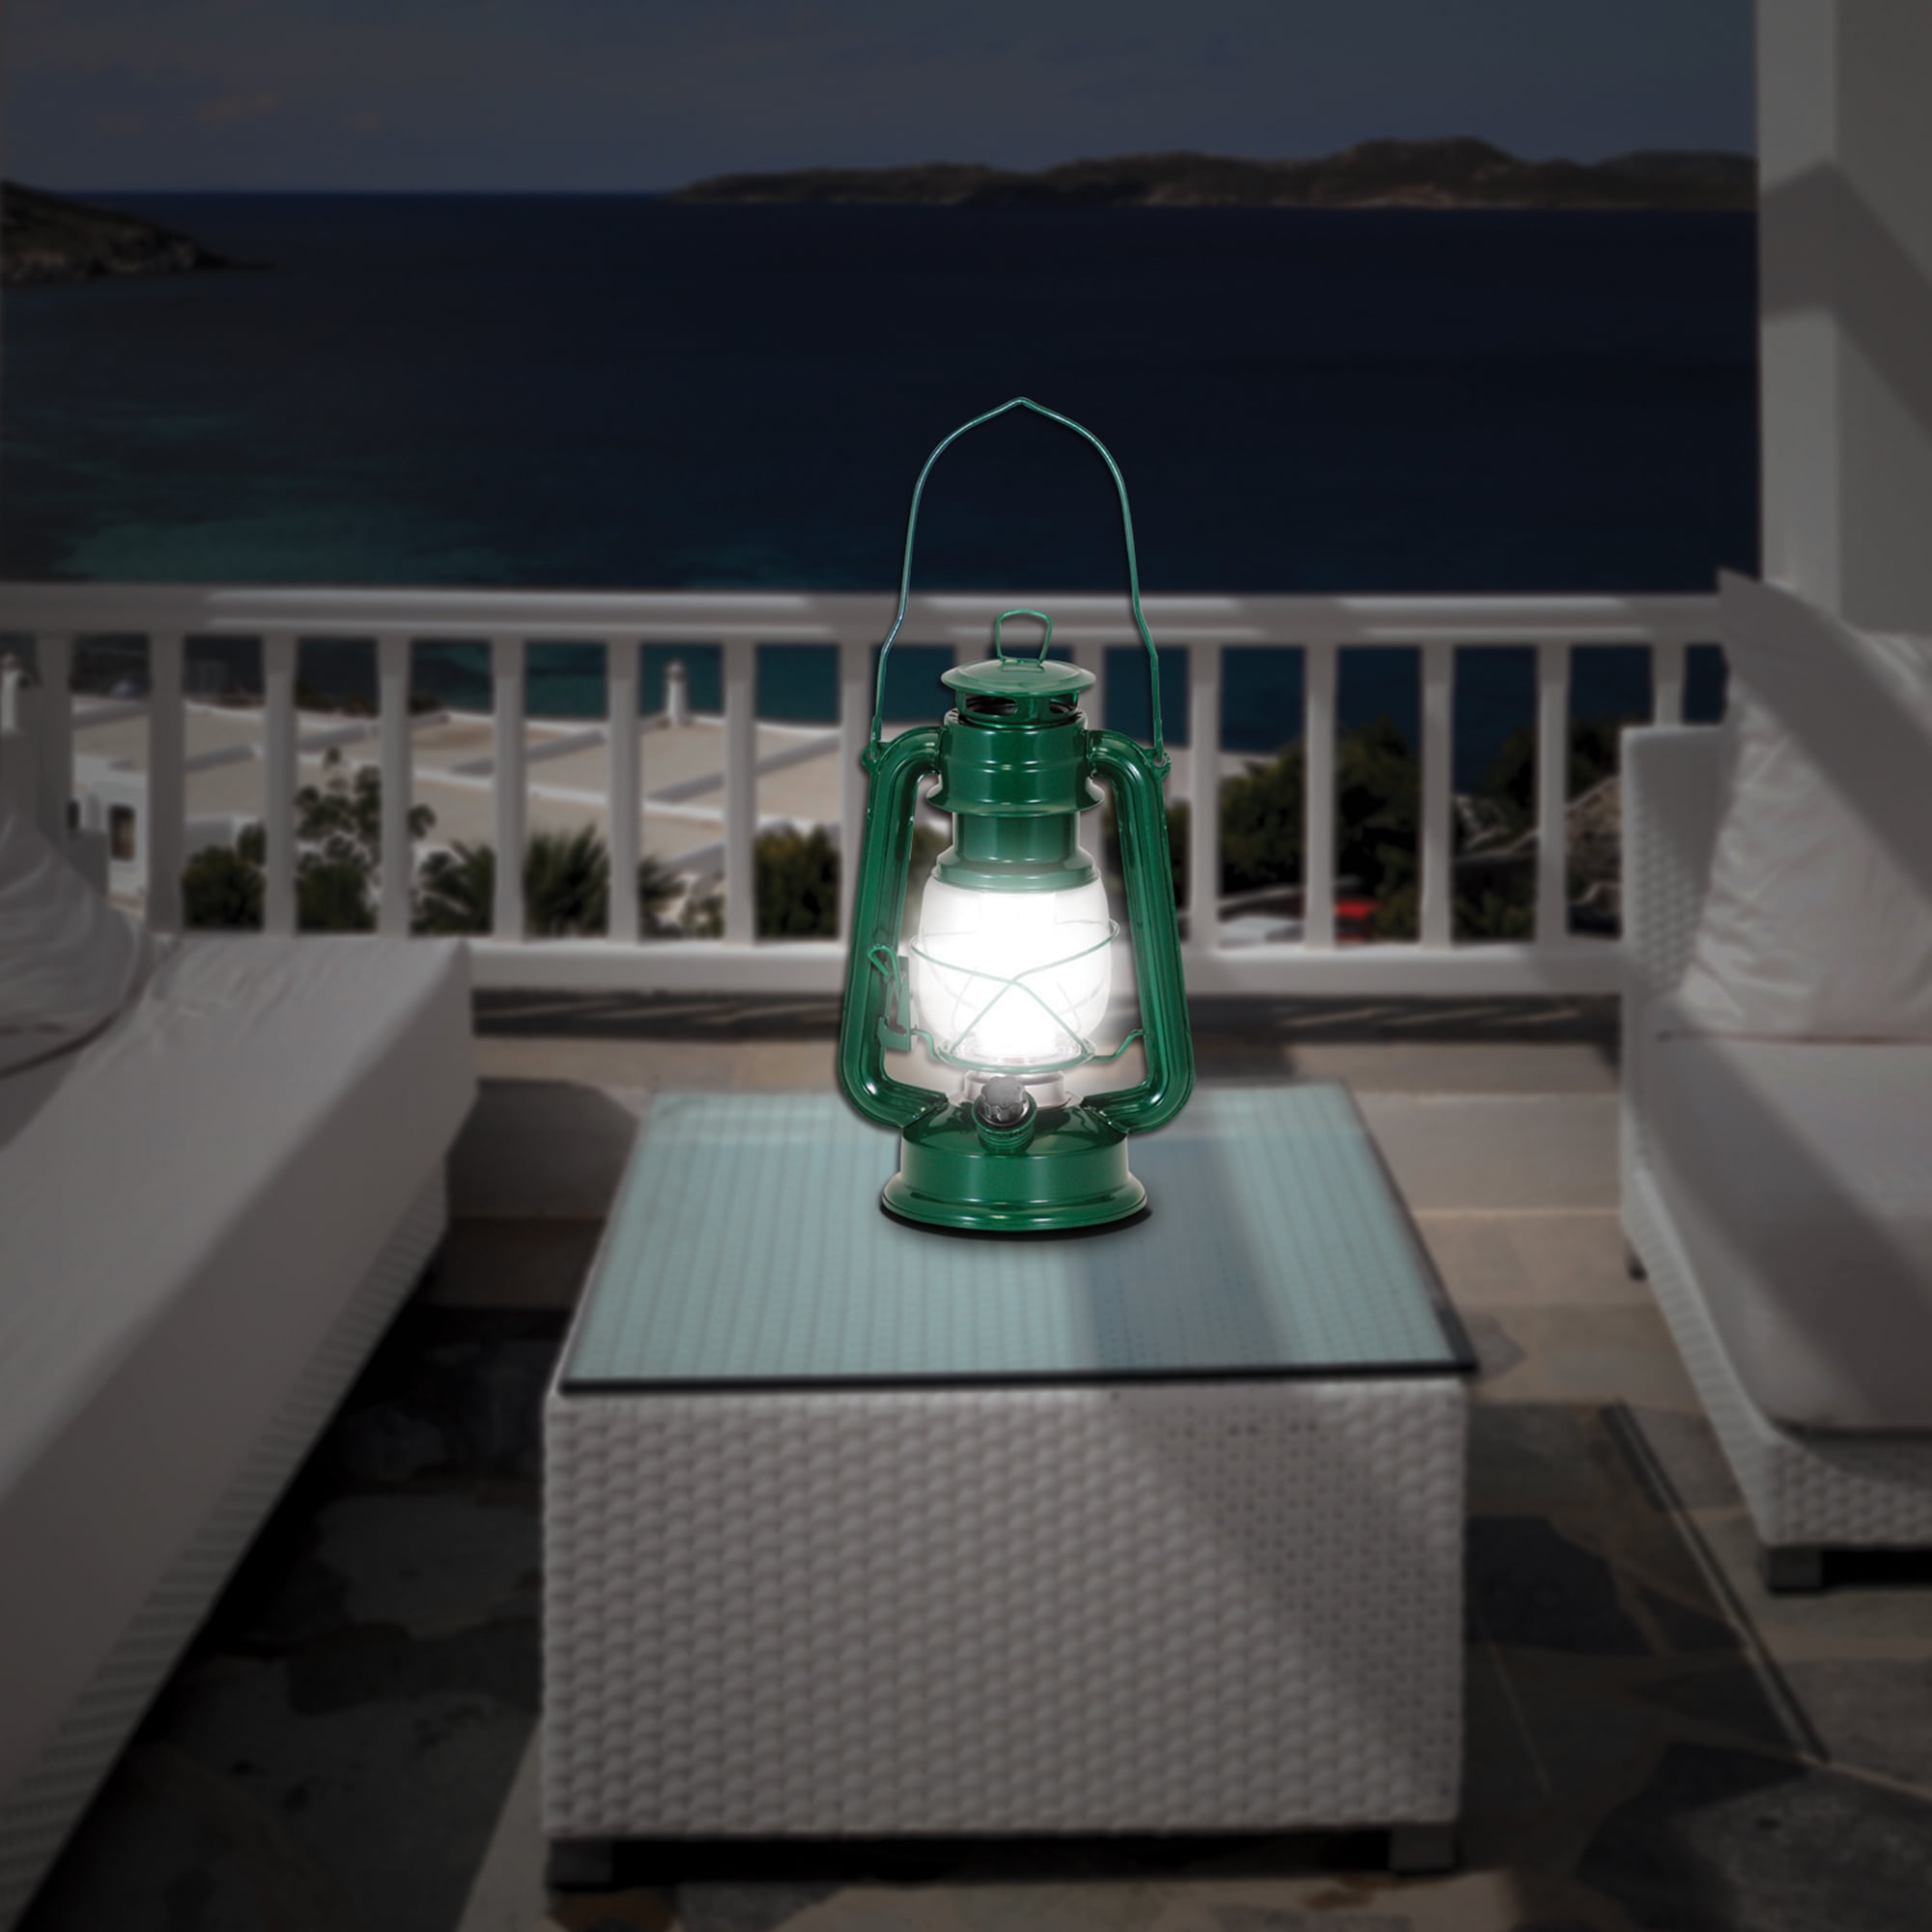 Northpoint 150 Lumen Vintage Santorini Blue Battery Operated 12 LED Lantern  190610 - The Home Depot